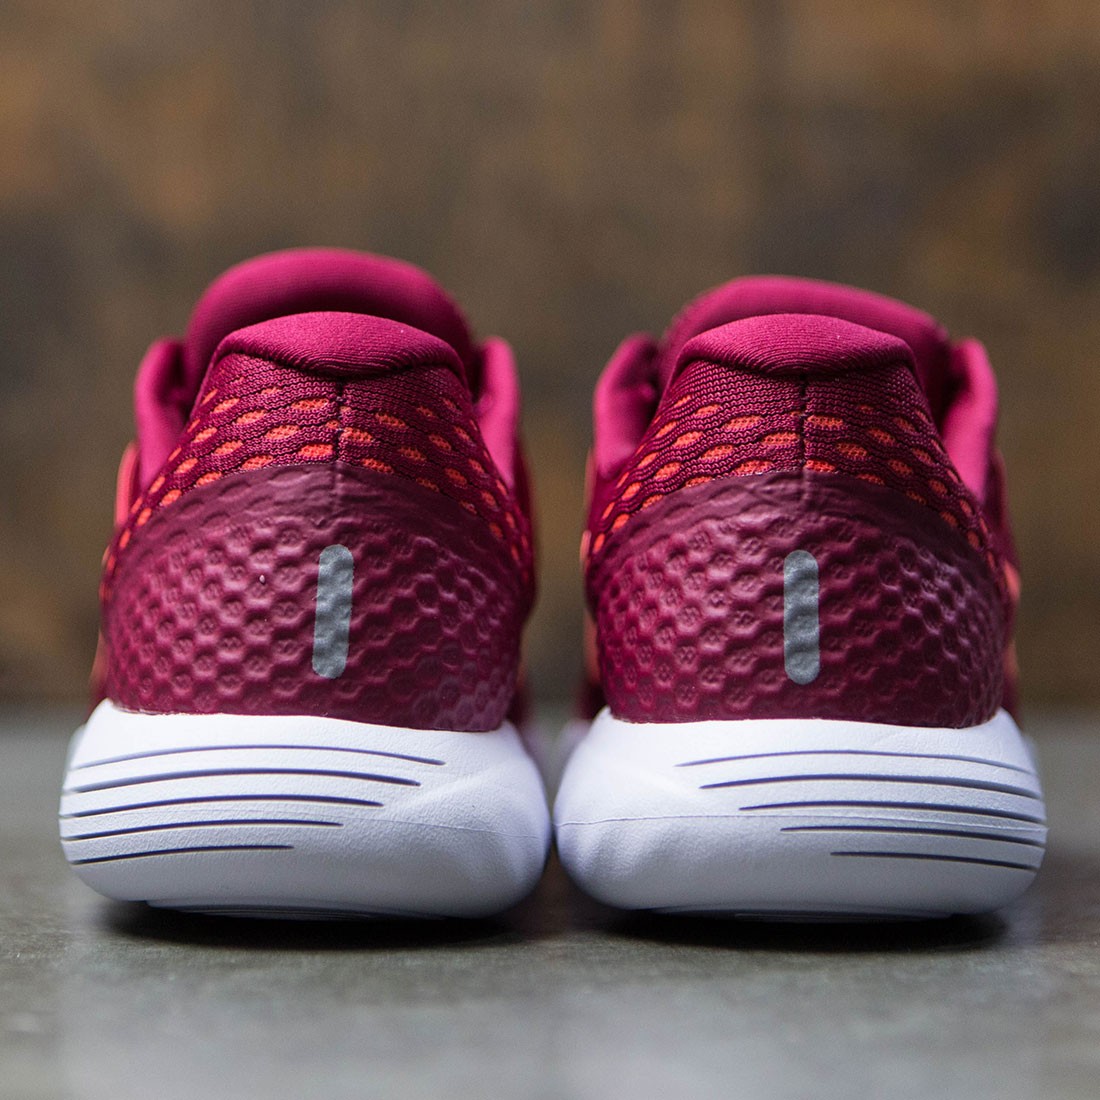 Nike Lunarglide 8 (red / noble red / bright